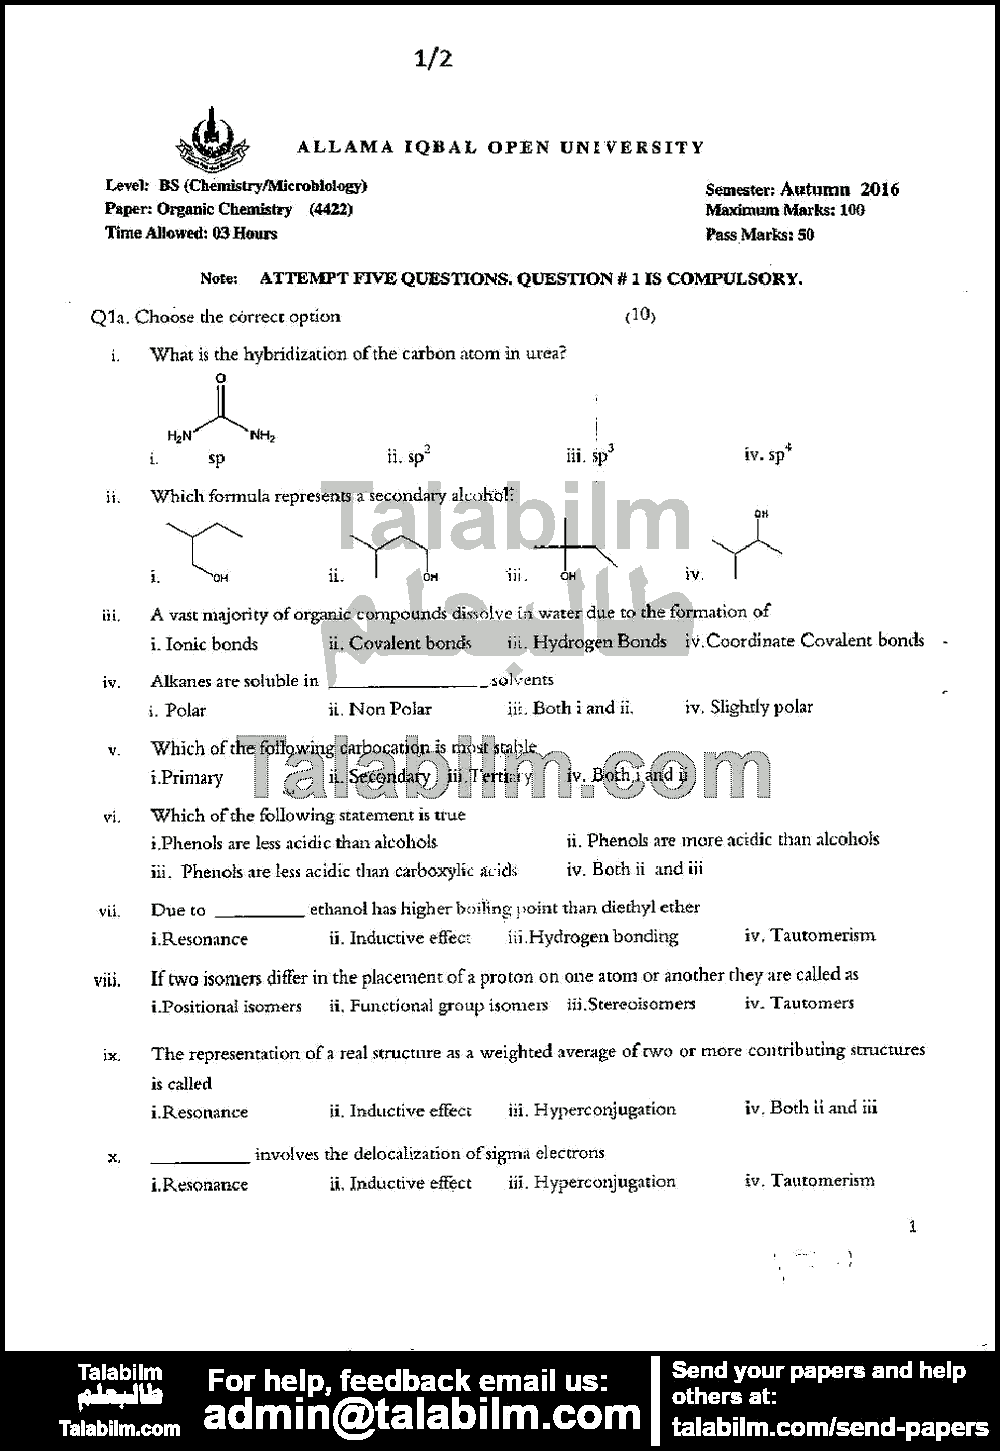 Organic Chemistry 4422 past paper for Autumn 2016